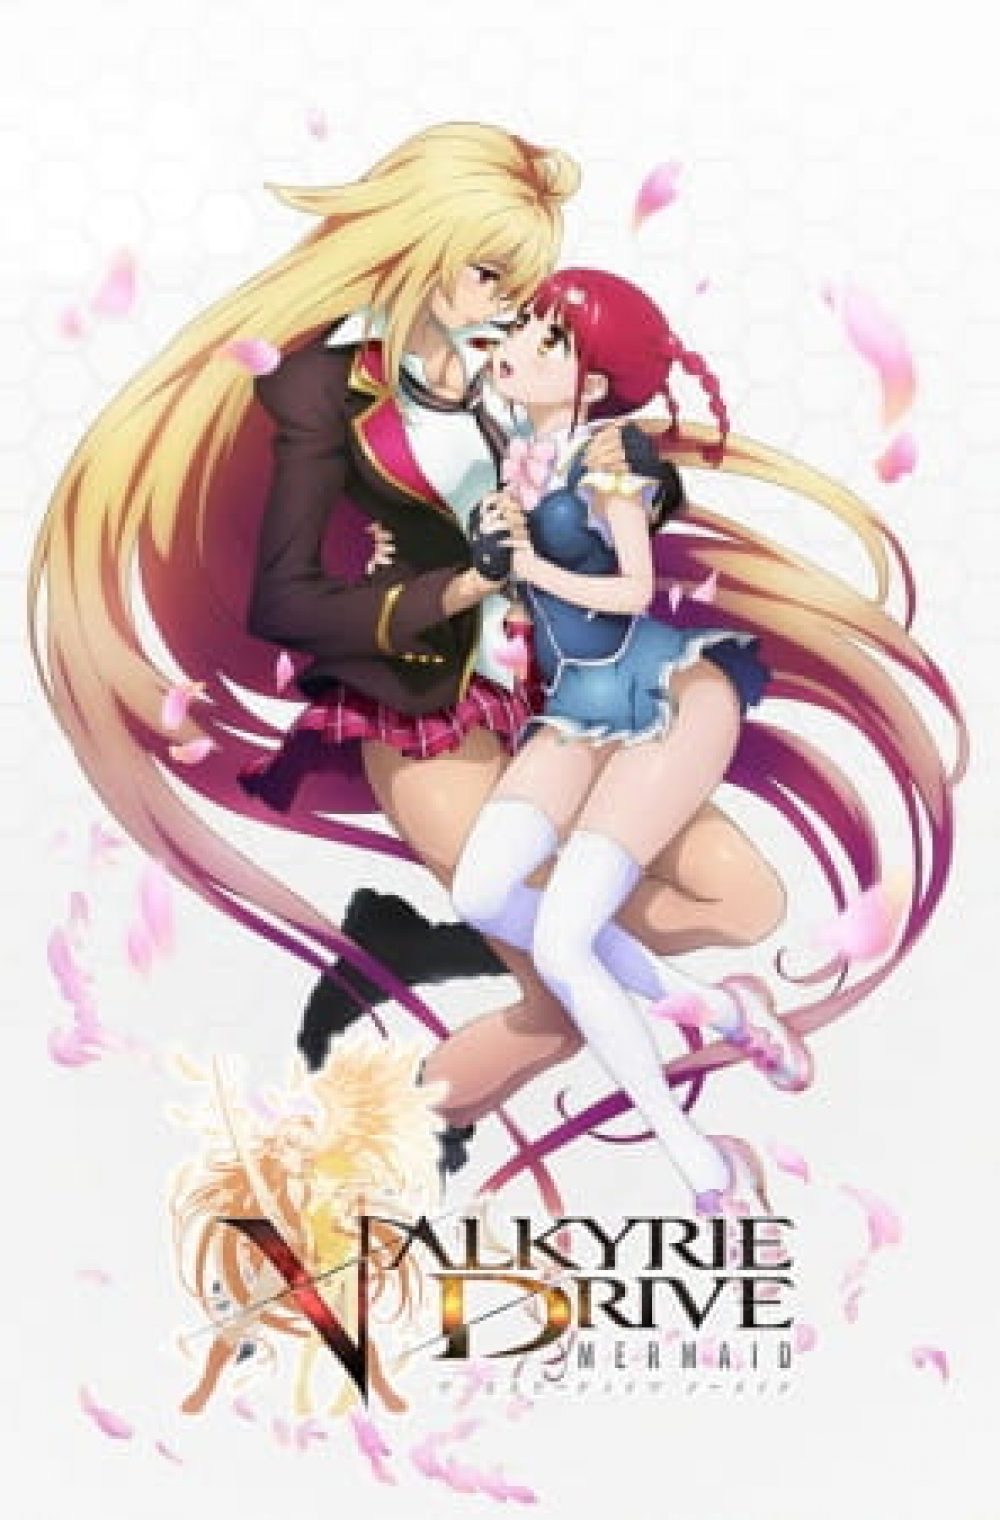 valkyrie drive mermaid uncensored download free